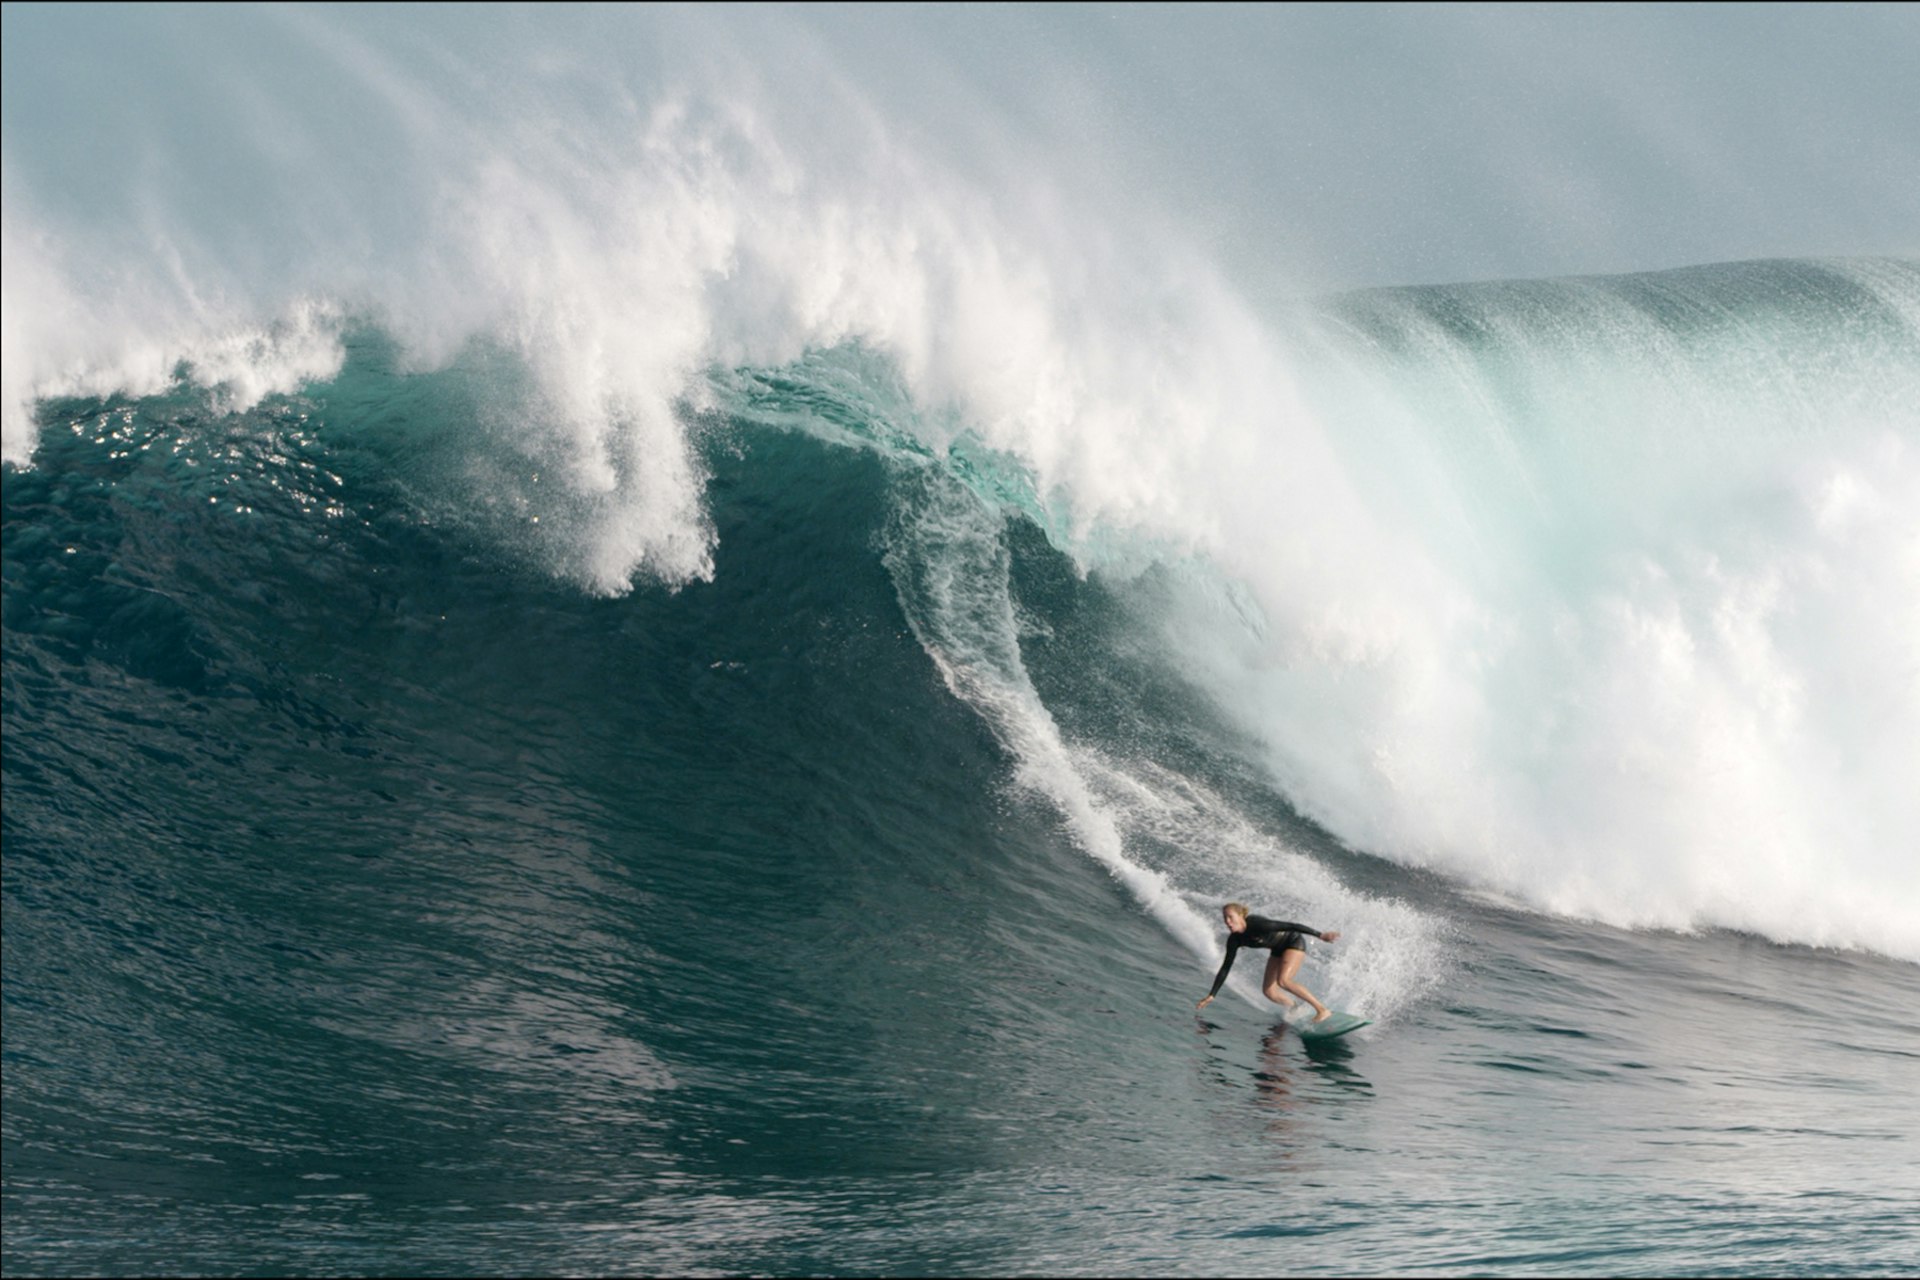 Big wave icon Paige Alms is pushing for surfing to take women seriously